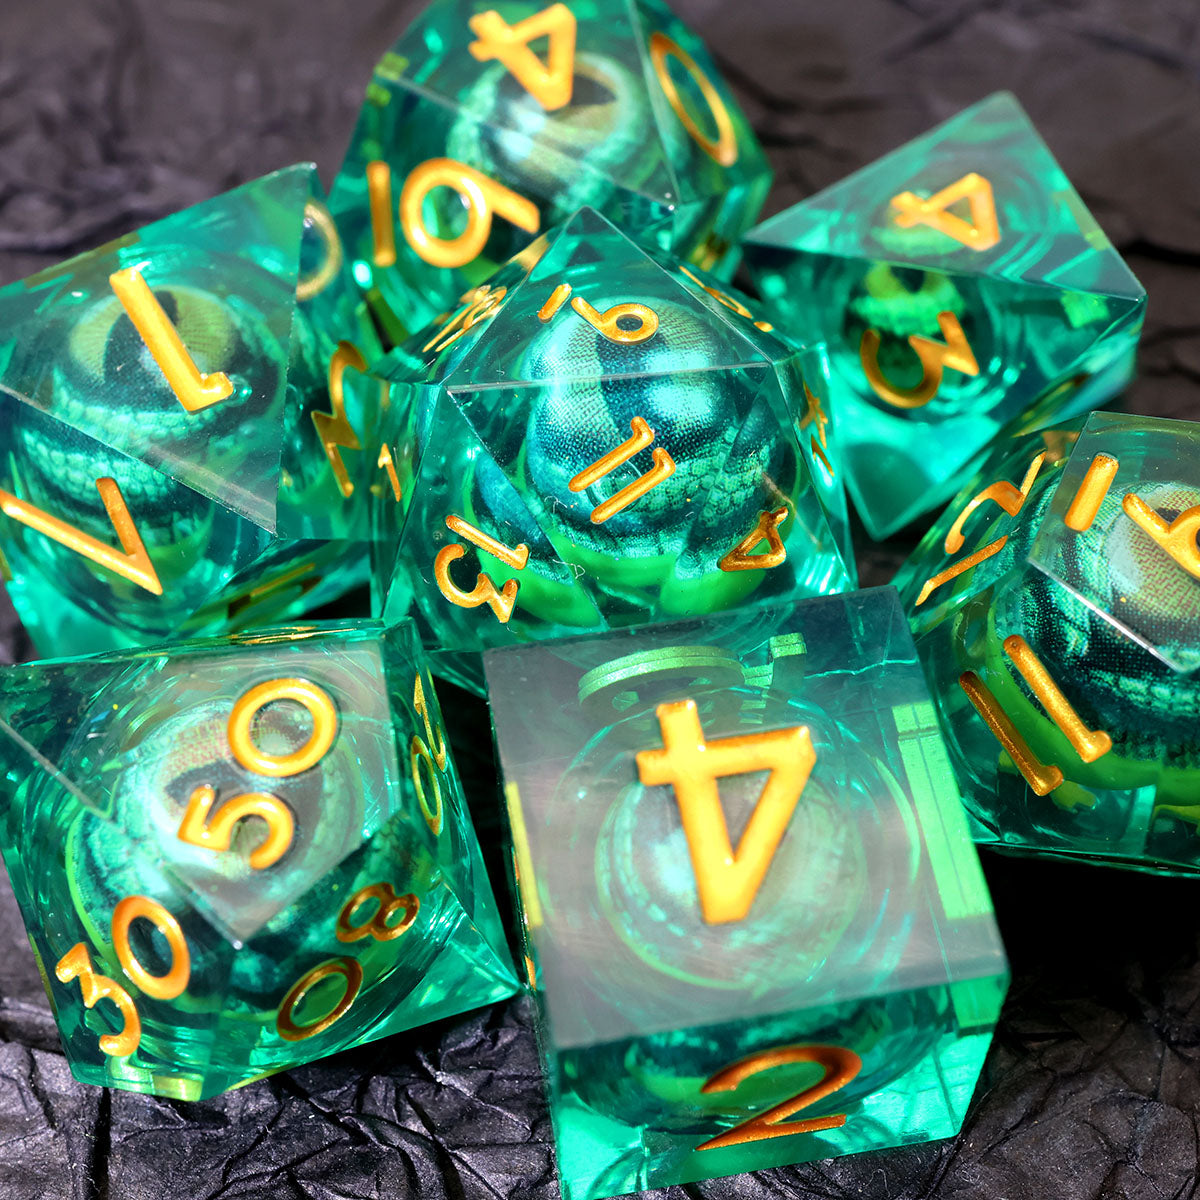 dragon eye dnd dice sets, TTRPG, role playing games and dice goblin, critical critter collectors